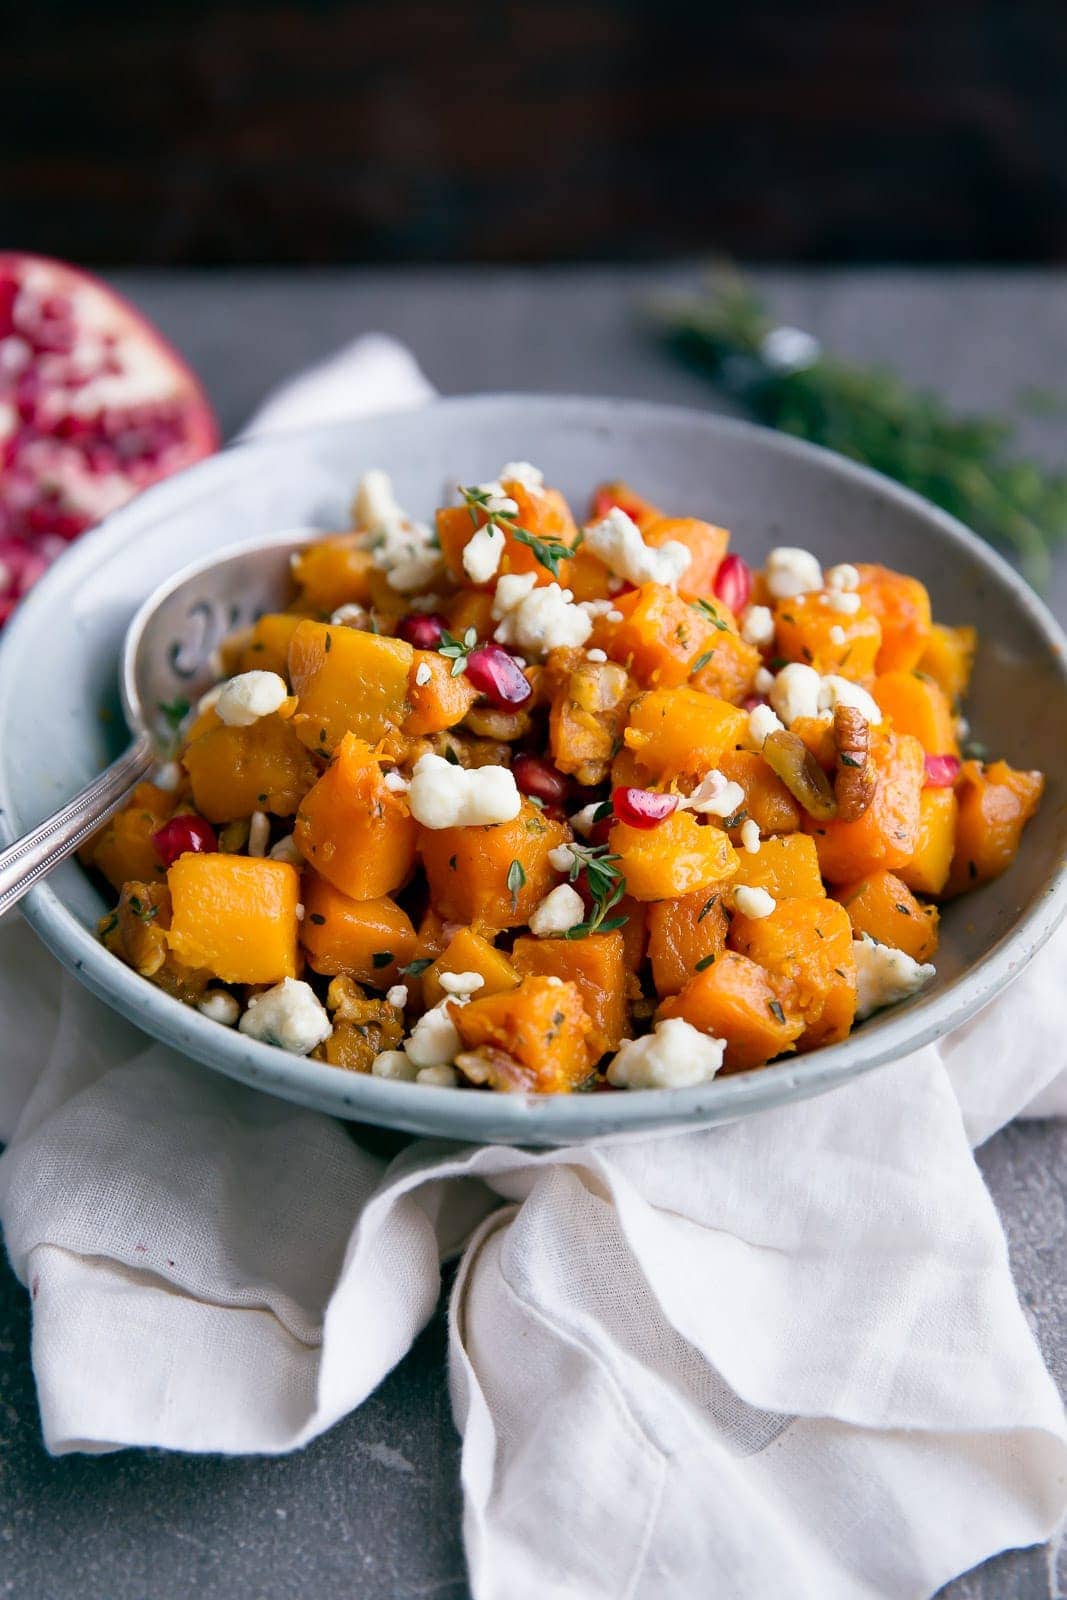 A side dish worthy of center stage: deliciously roasted butternut squash tossed with gorgonzola, pecans, and pomegranate!